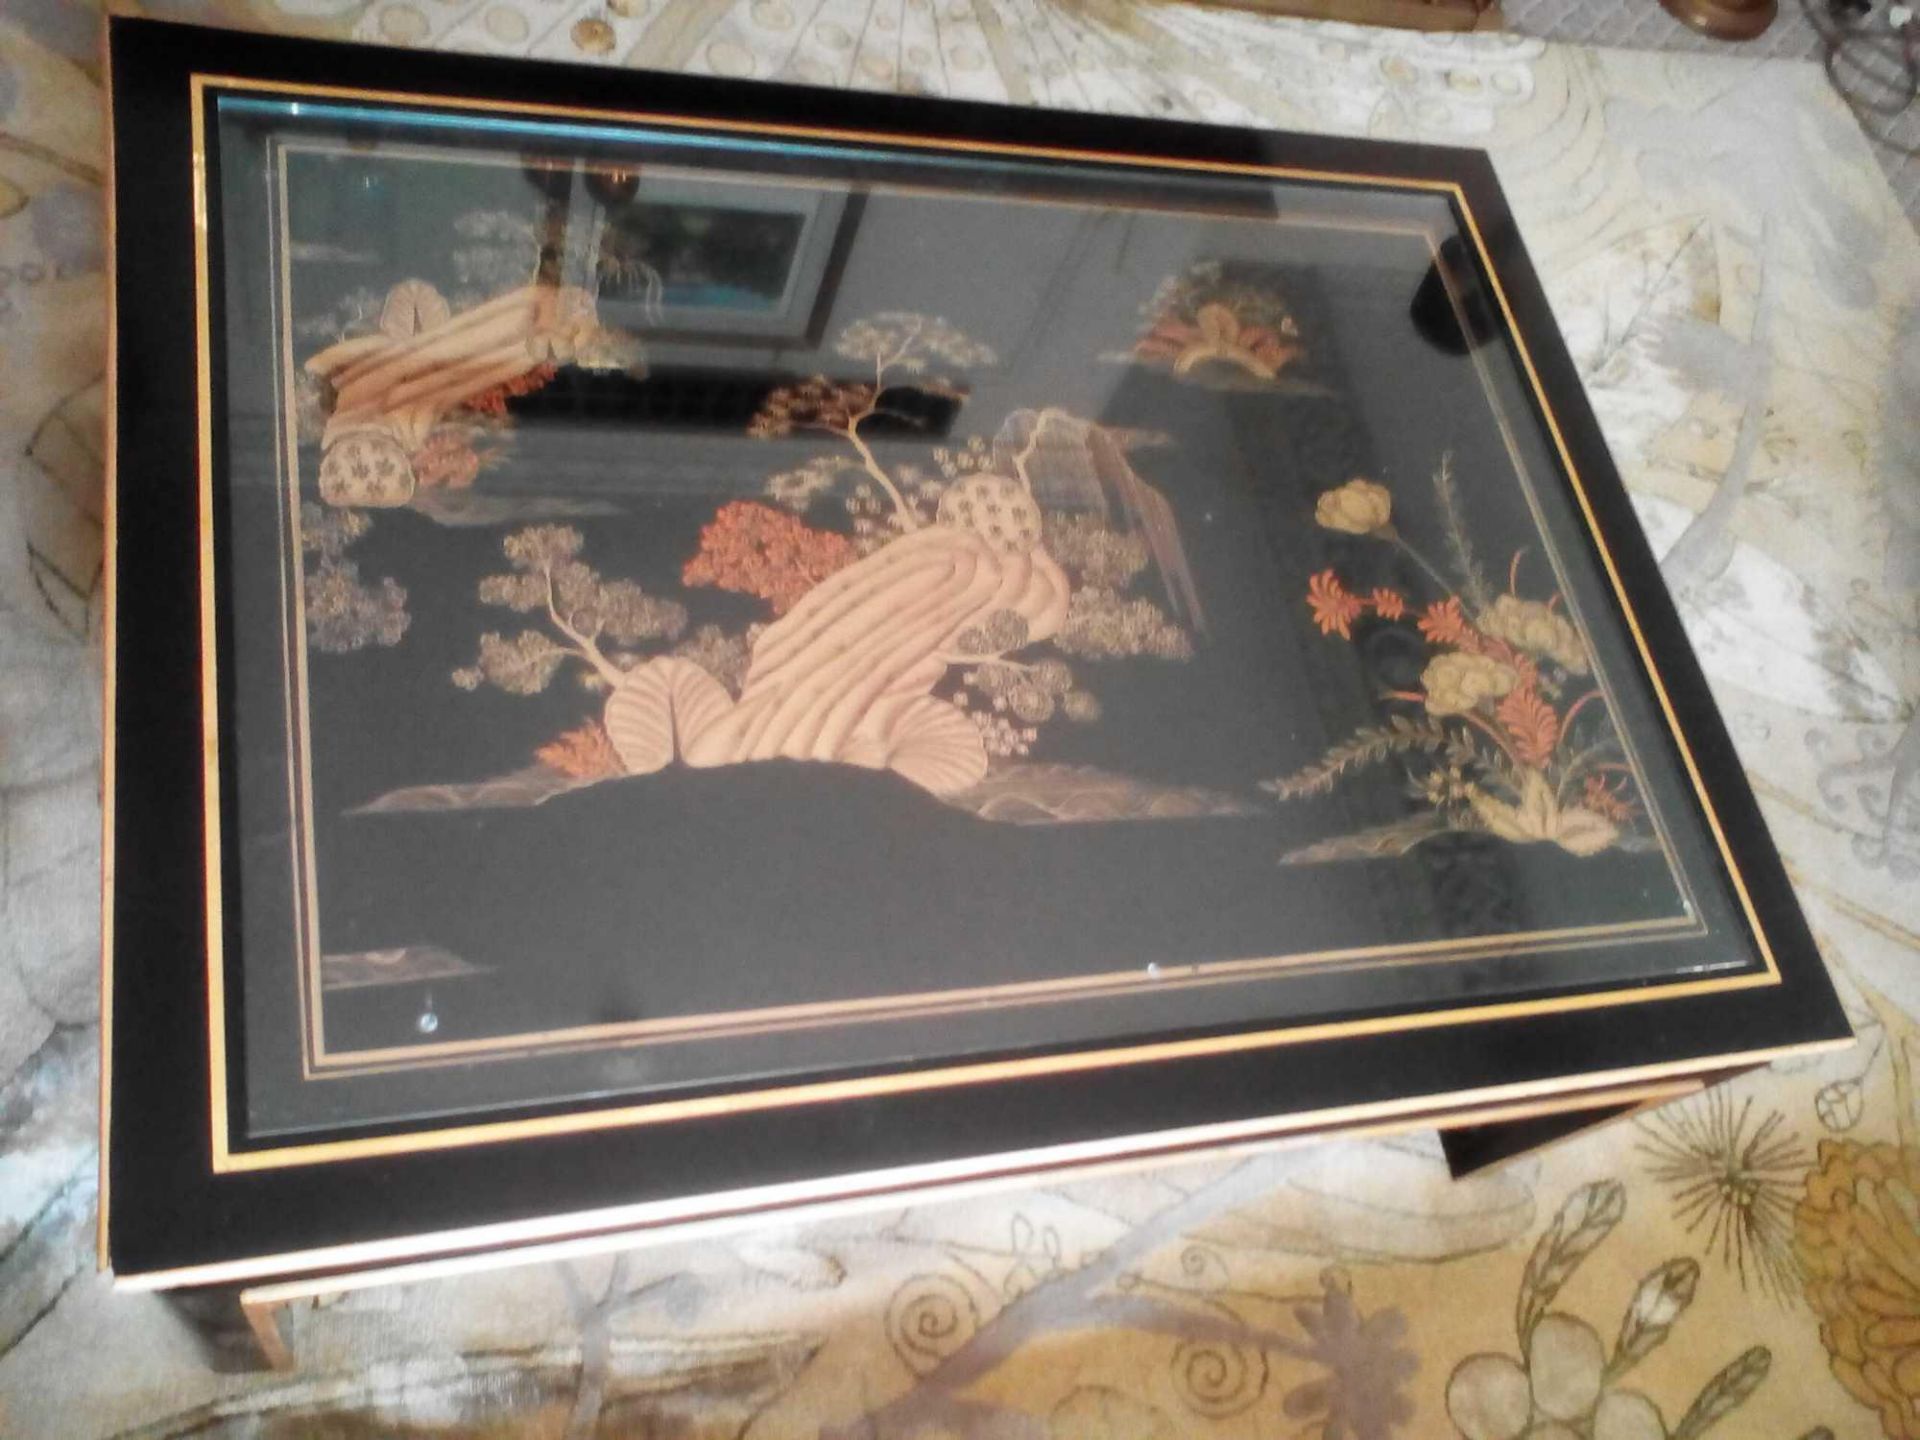 Black Lacquer Hand Decorated Chinoiserie Coffee Table With Gilt Line Detail 120 x 90 x 46cm - Image 3 of 3